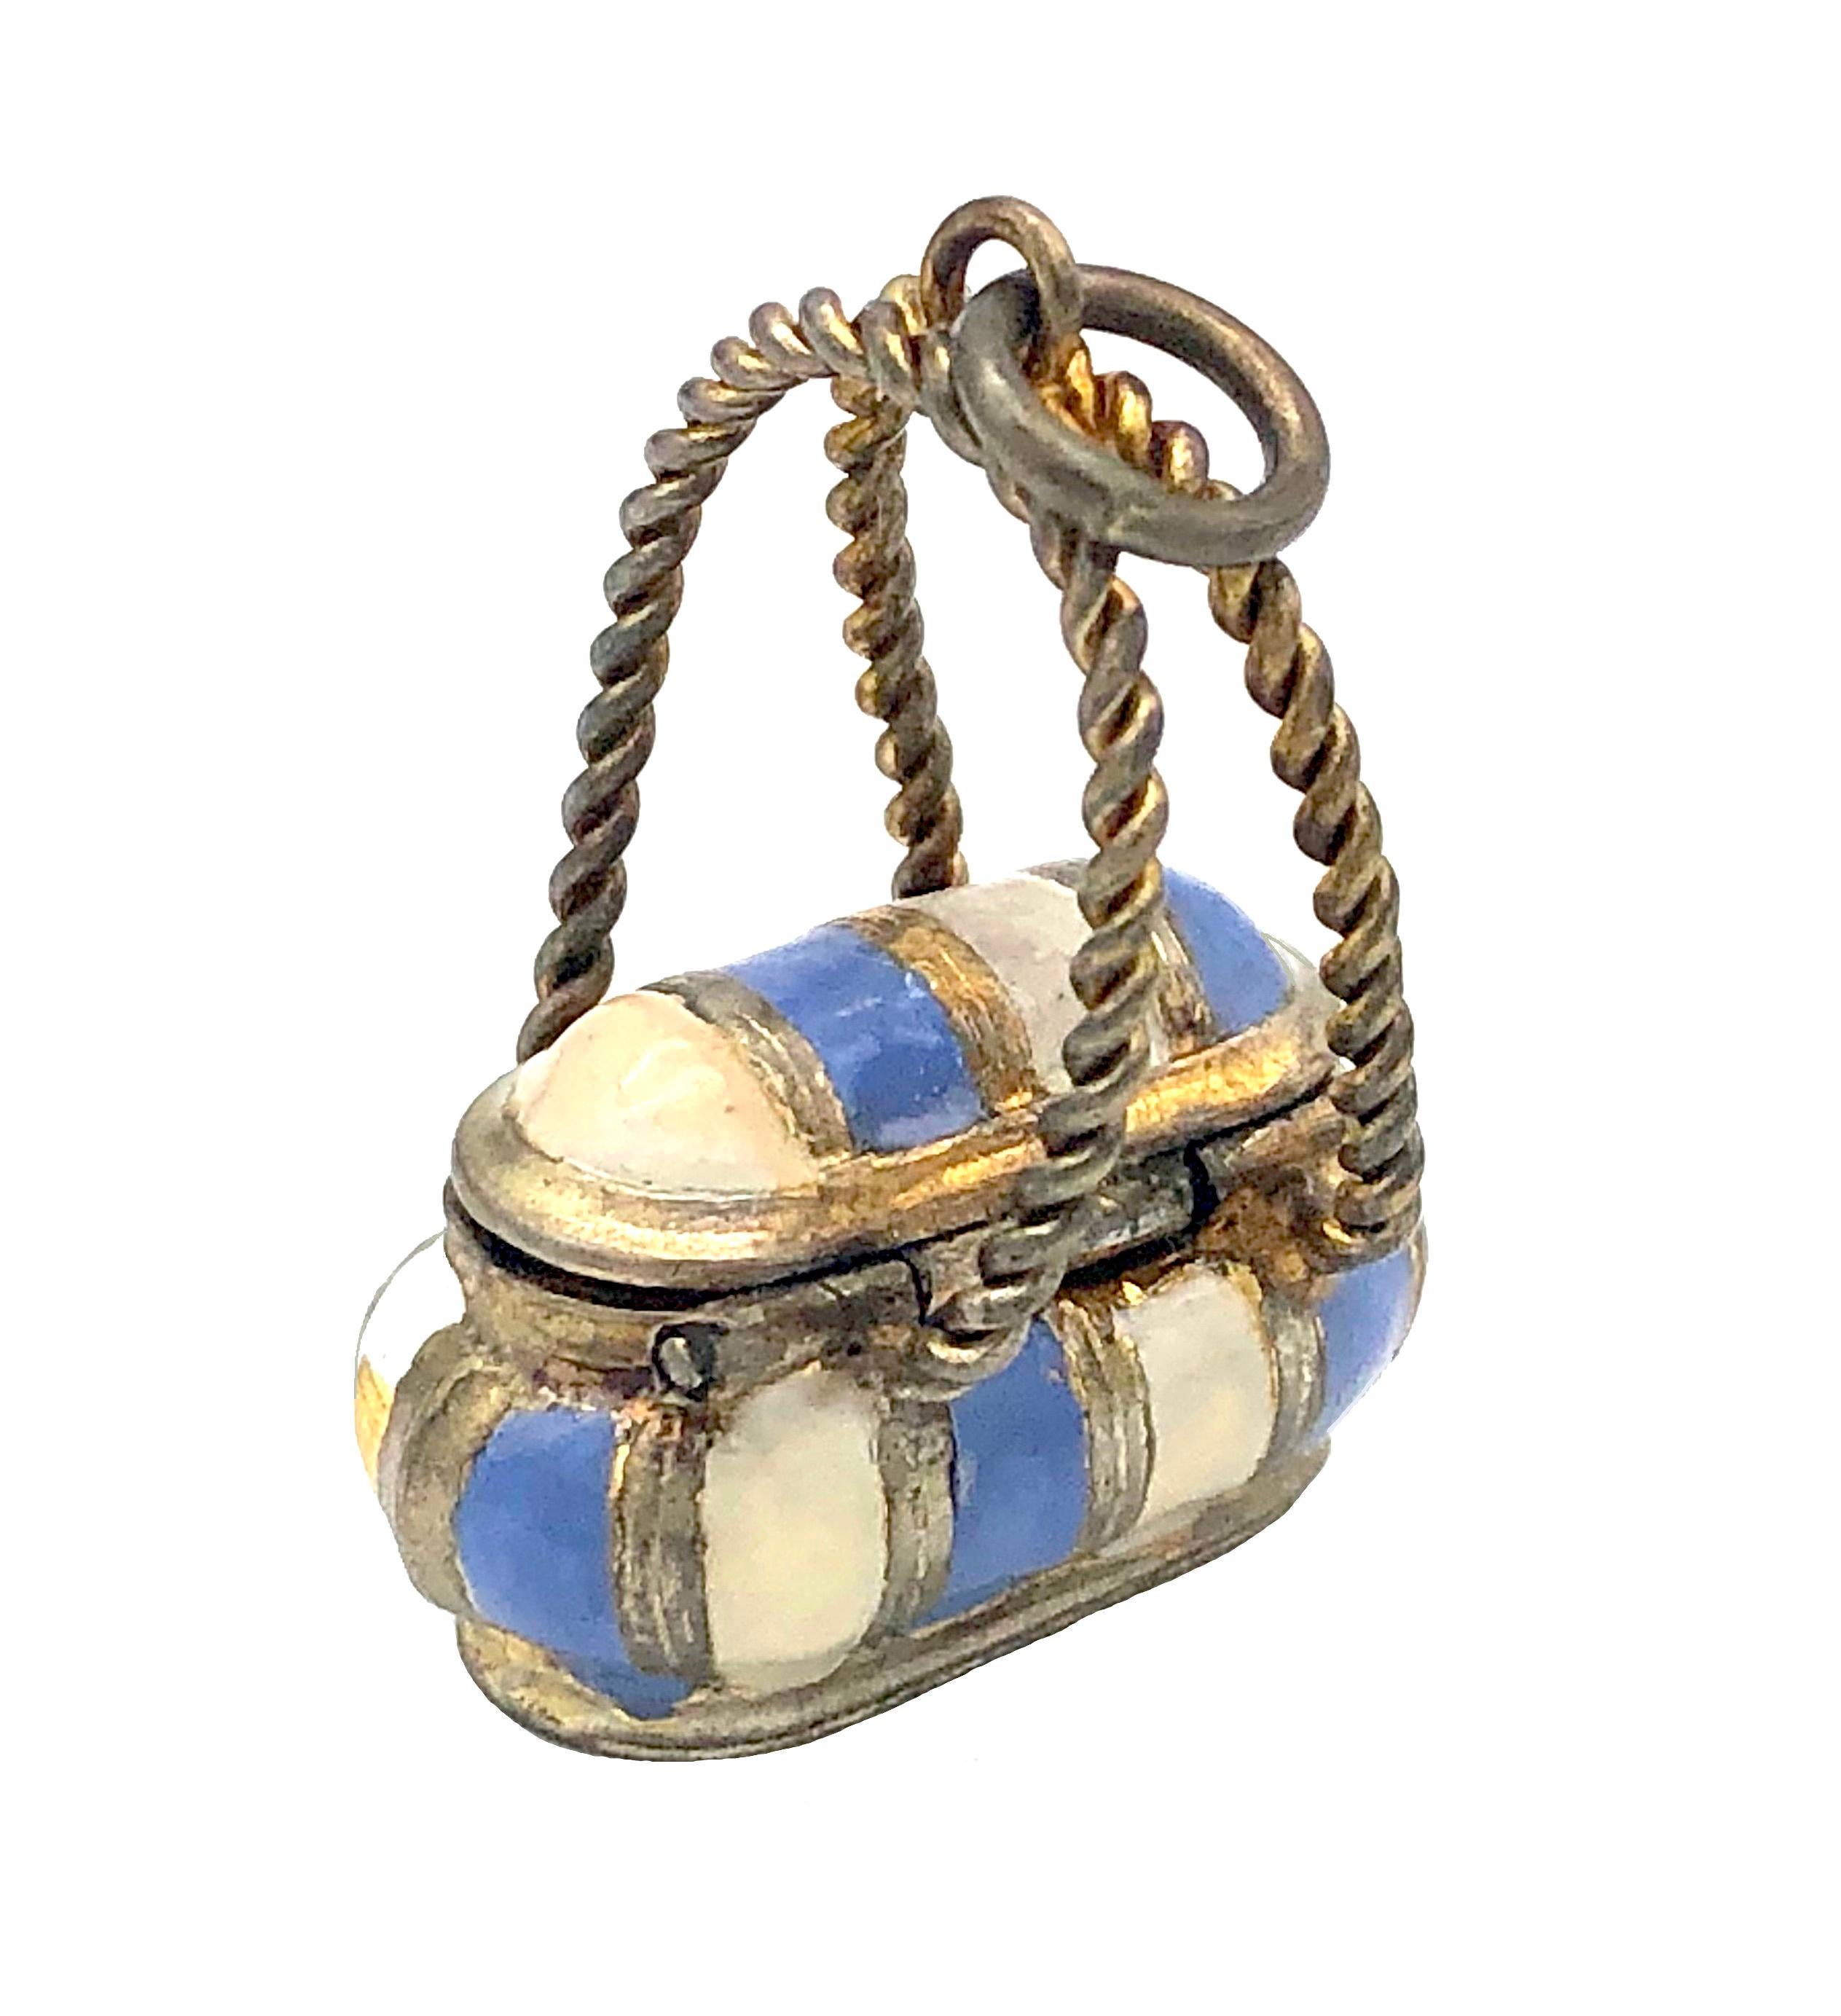 This delightful little pendant in the shape of a basket is made out of guilt metal and decorated with pale  blue and white enamel.  